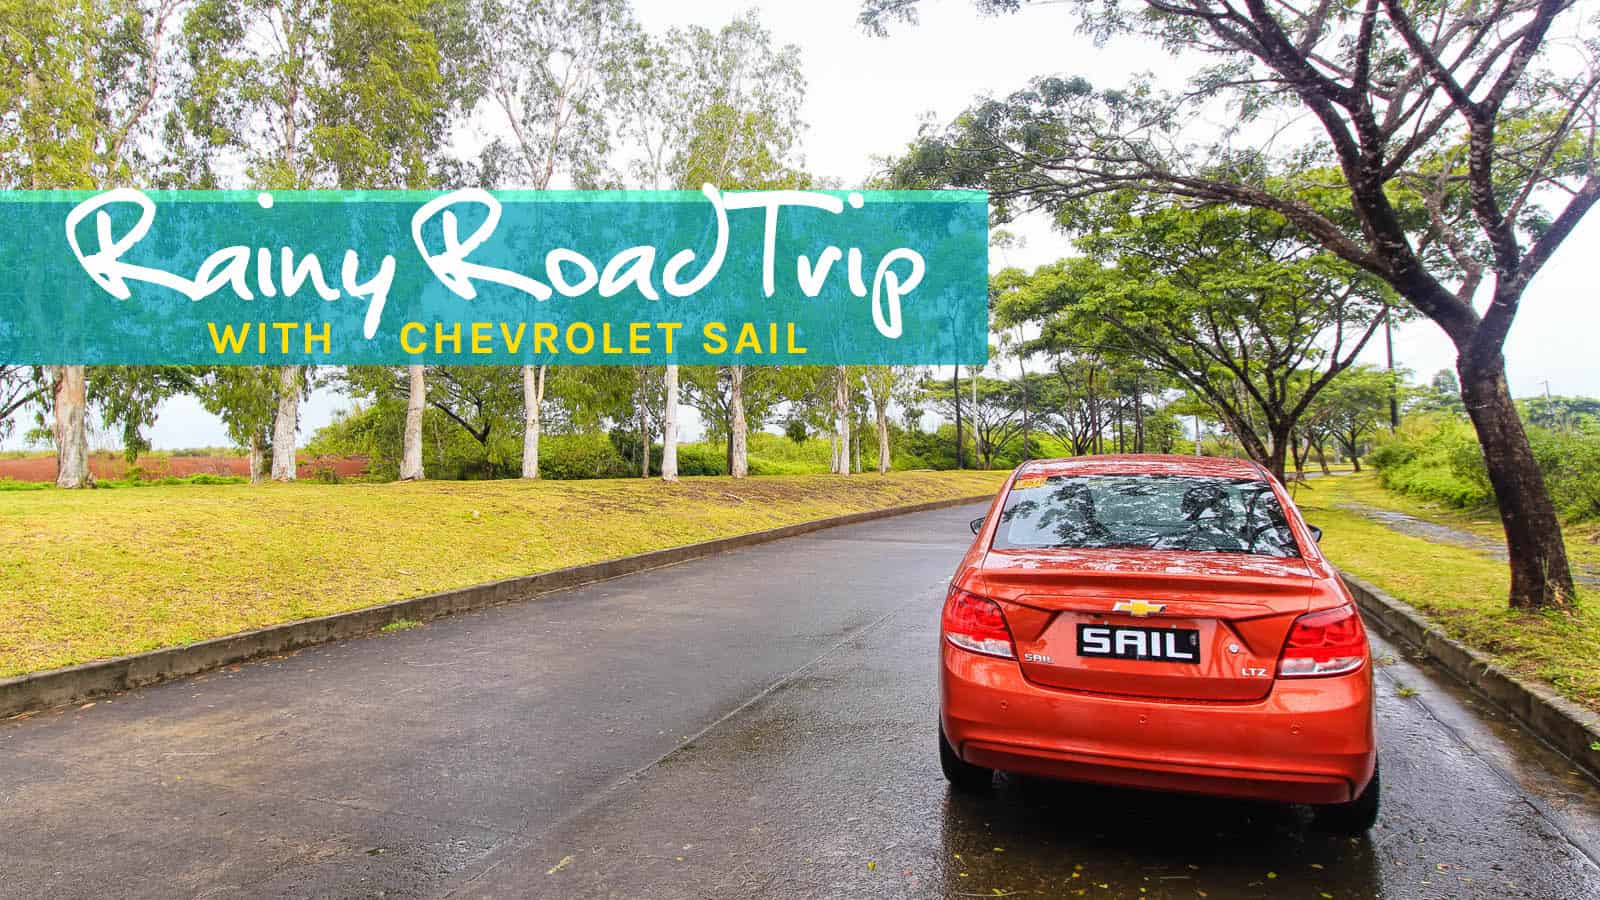 A Rainy Road Trip in Laguna with the Chevrolet SAIL